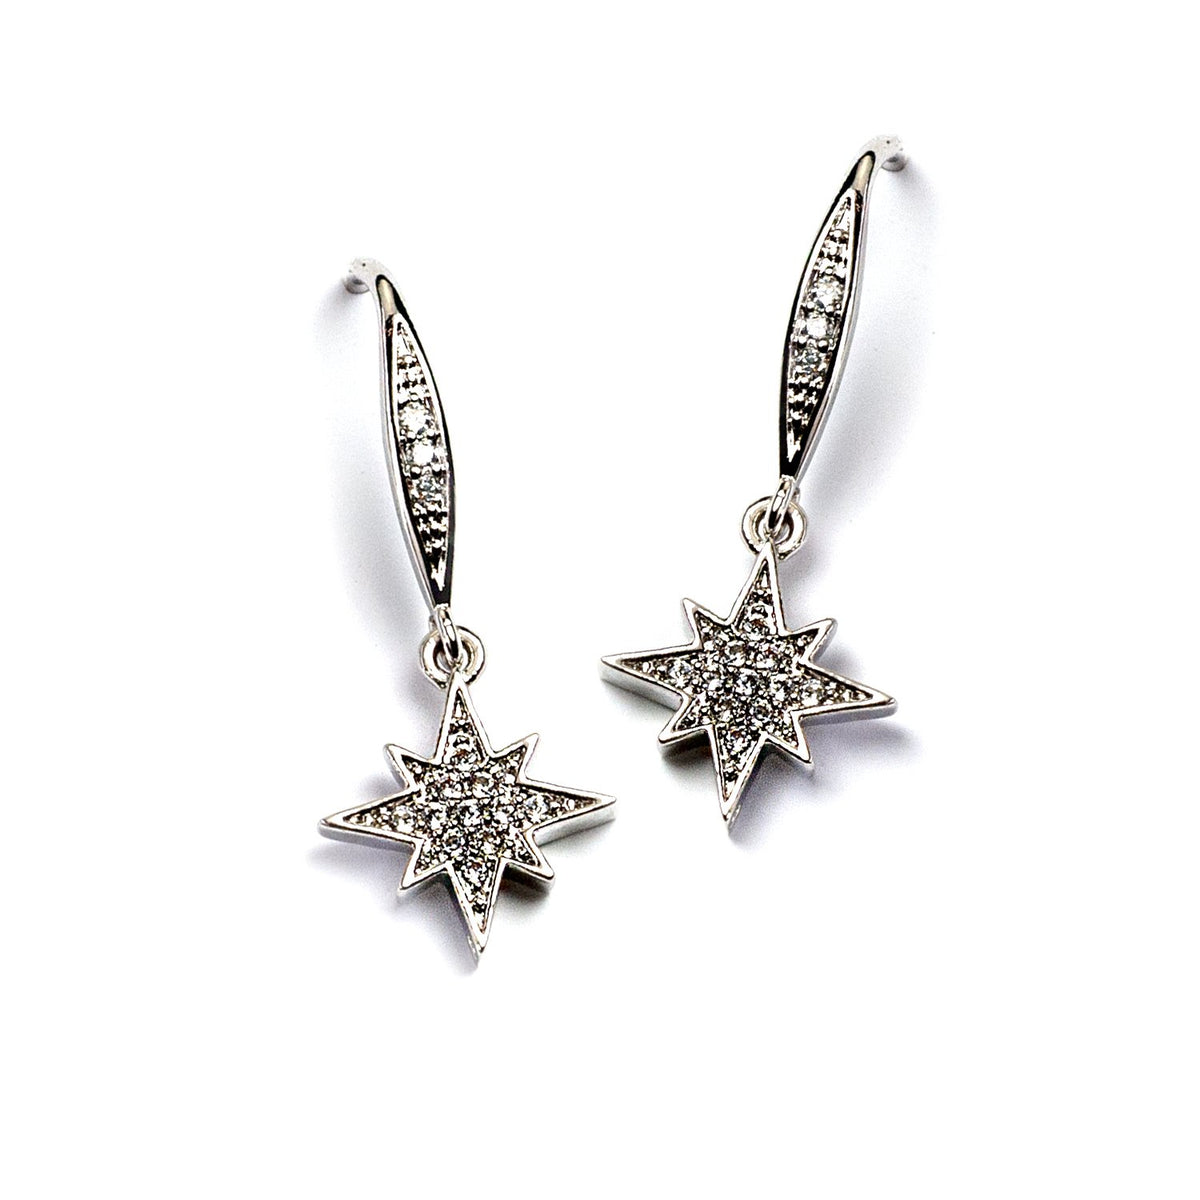 Tiny North Star Earrings E1505 - sweetromanceonlinejewelry